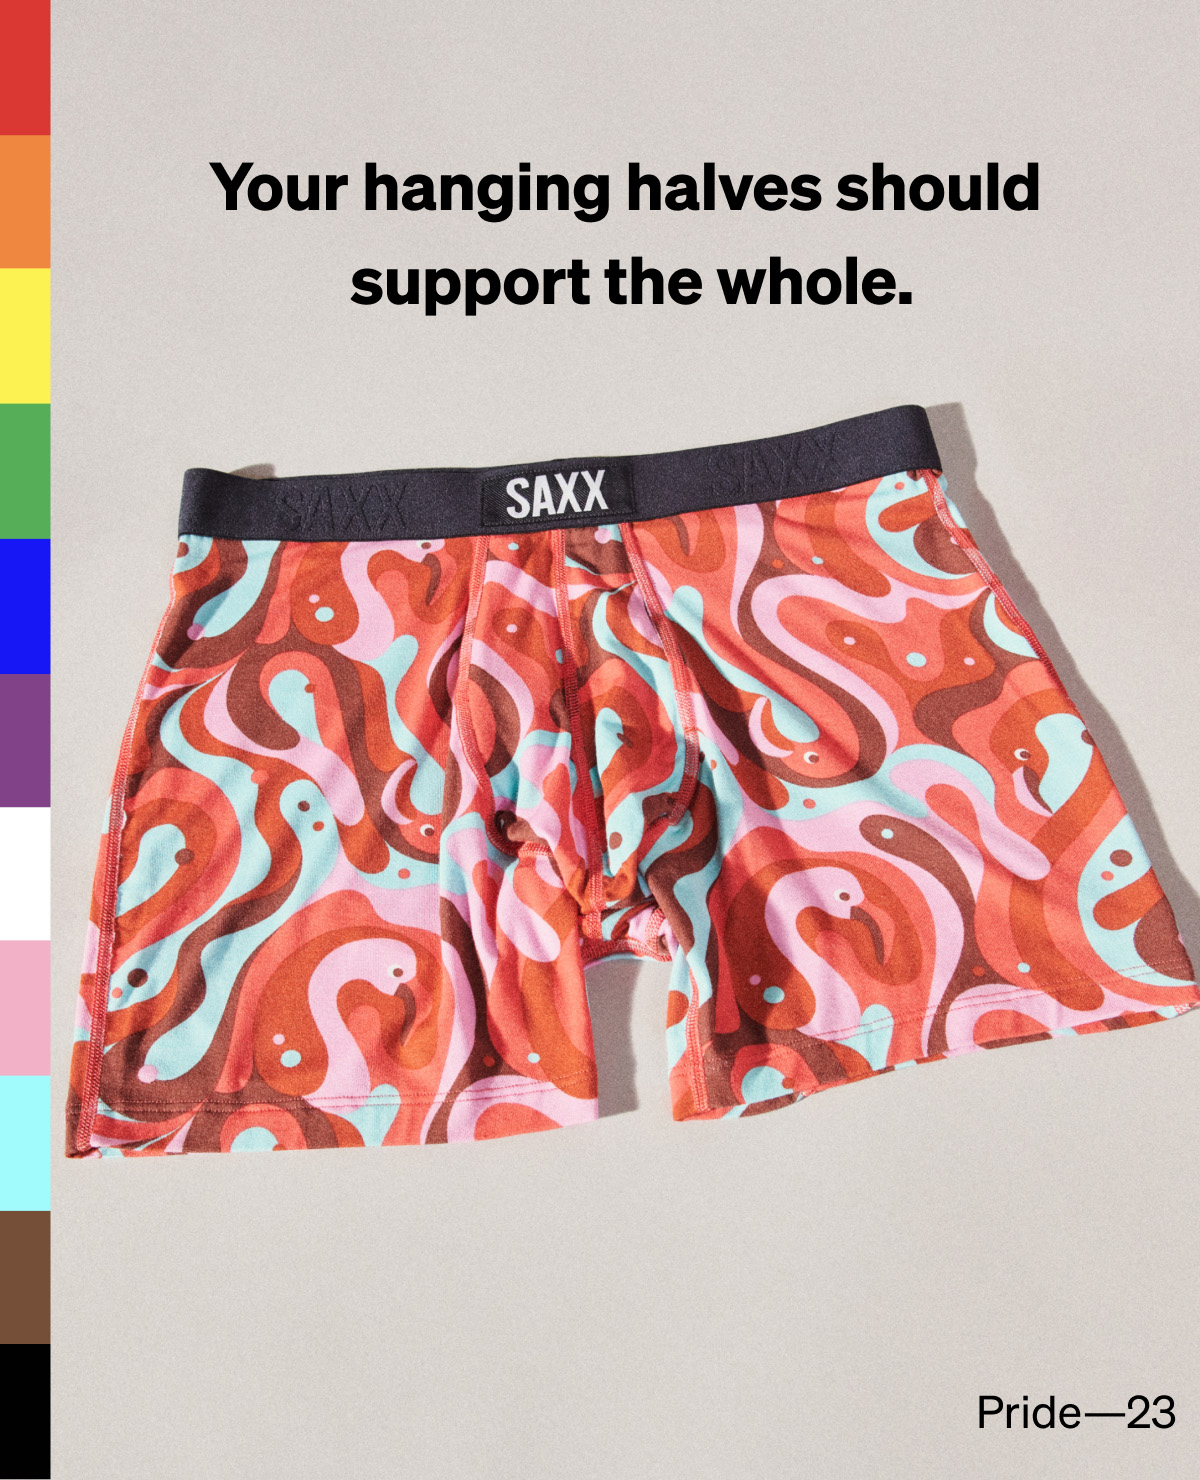 Balance your beans for the equality of beings 🏳️‍🌈 - SAXX Underwear